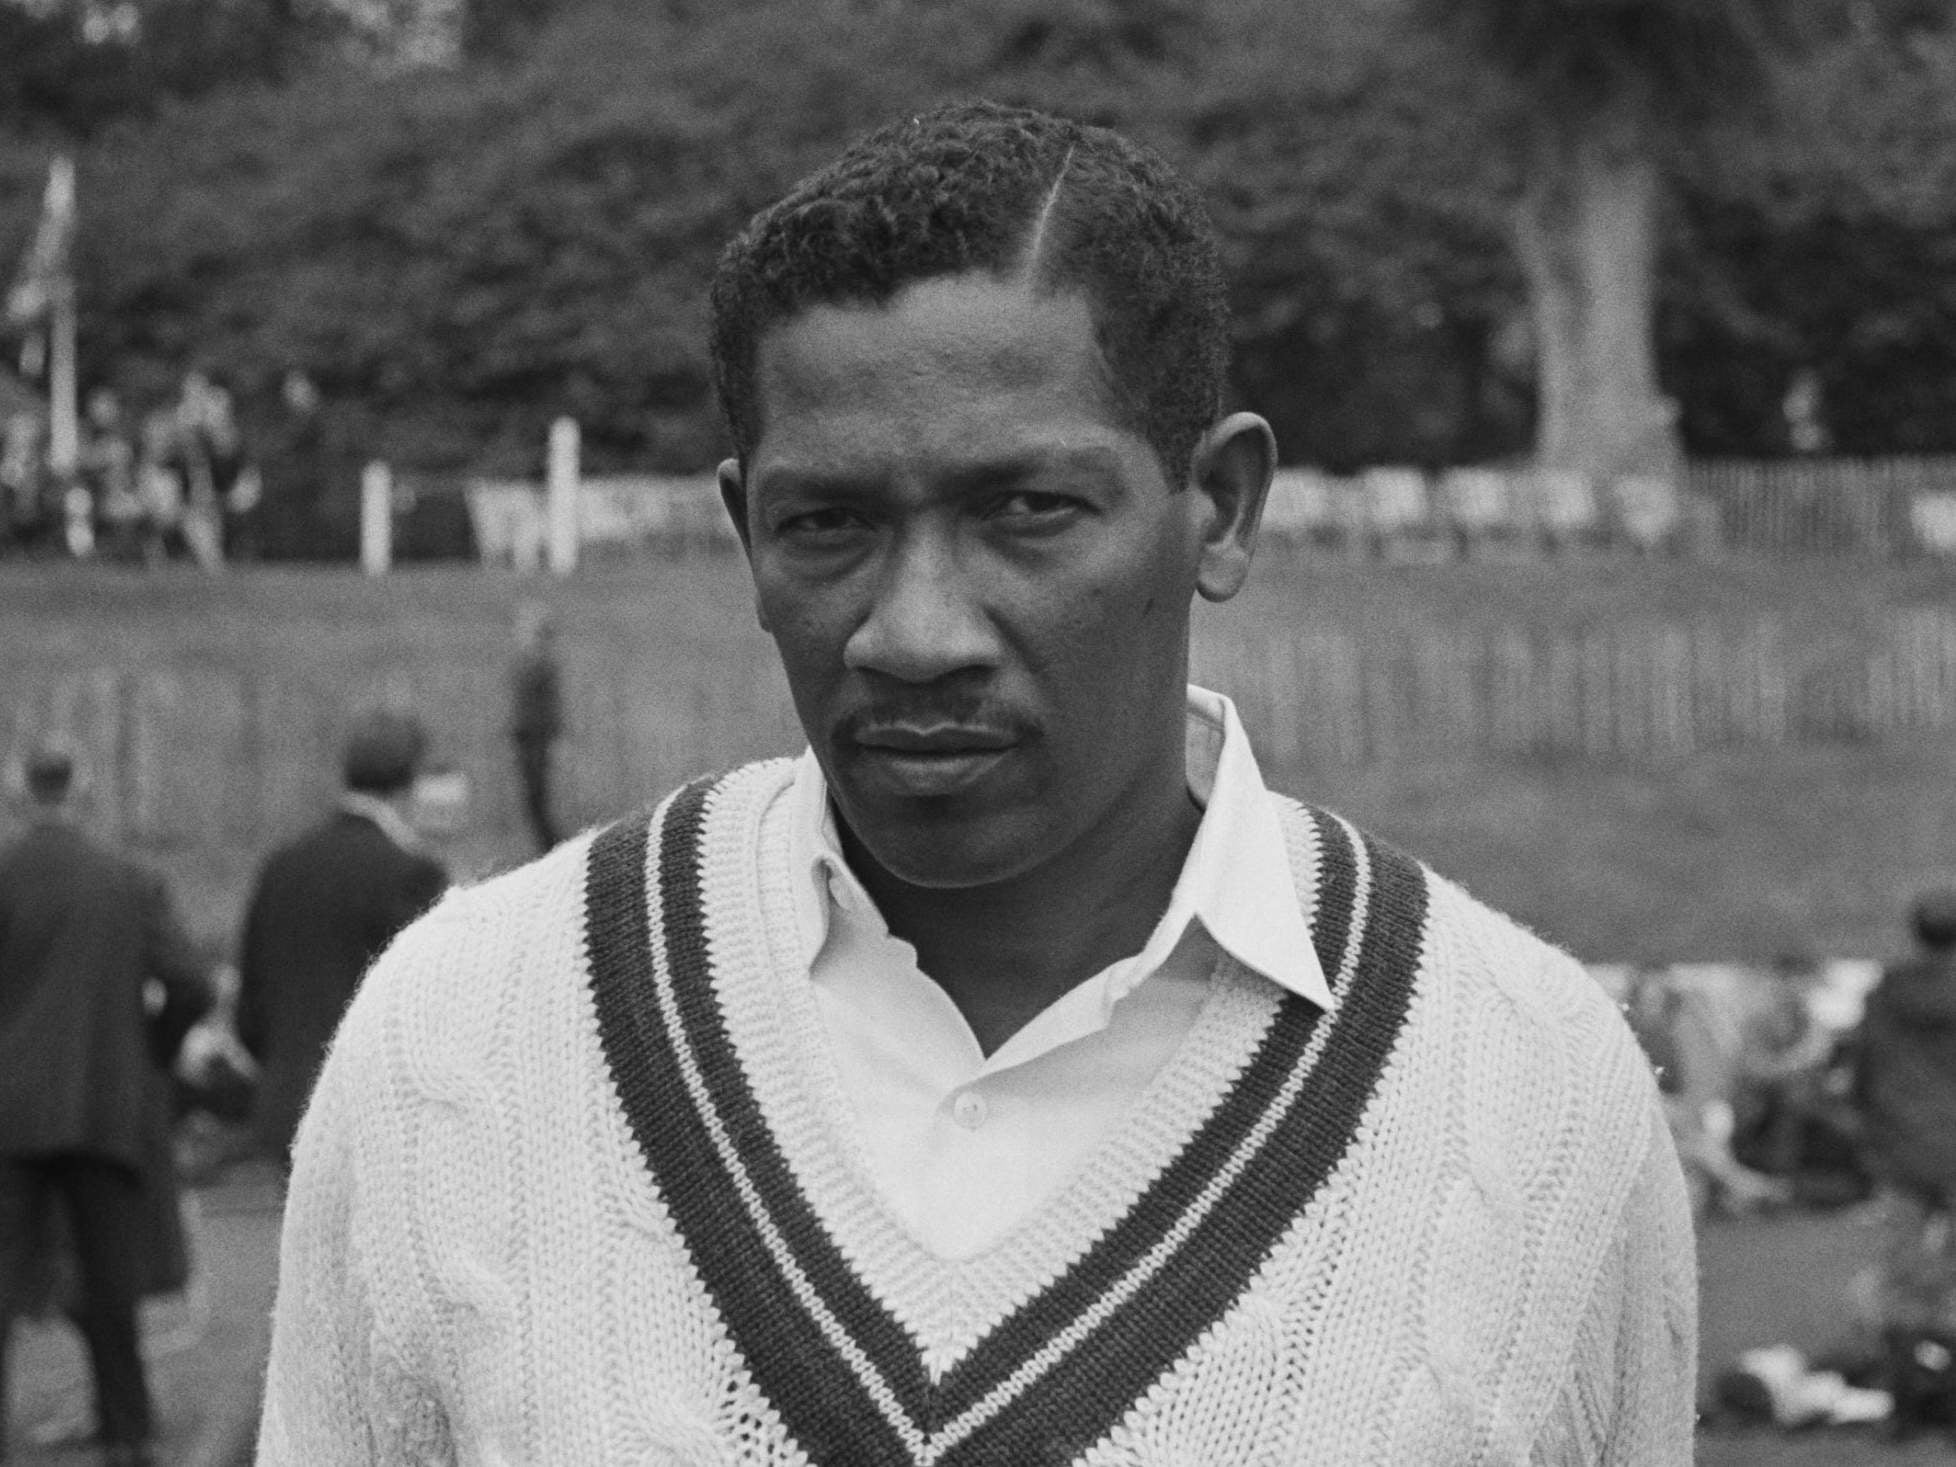 Butcher in 1969: a cultured stroke player and a powerful hitter on both sides of the wicket